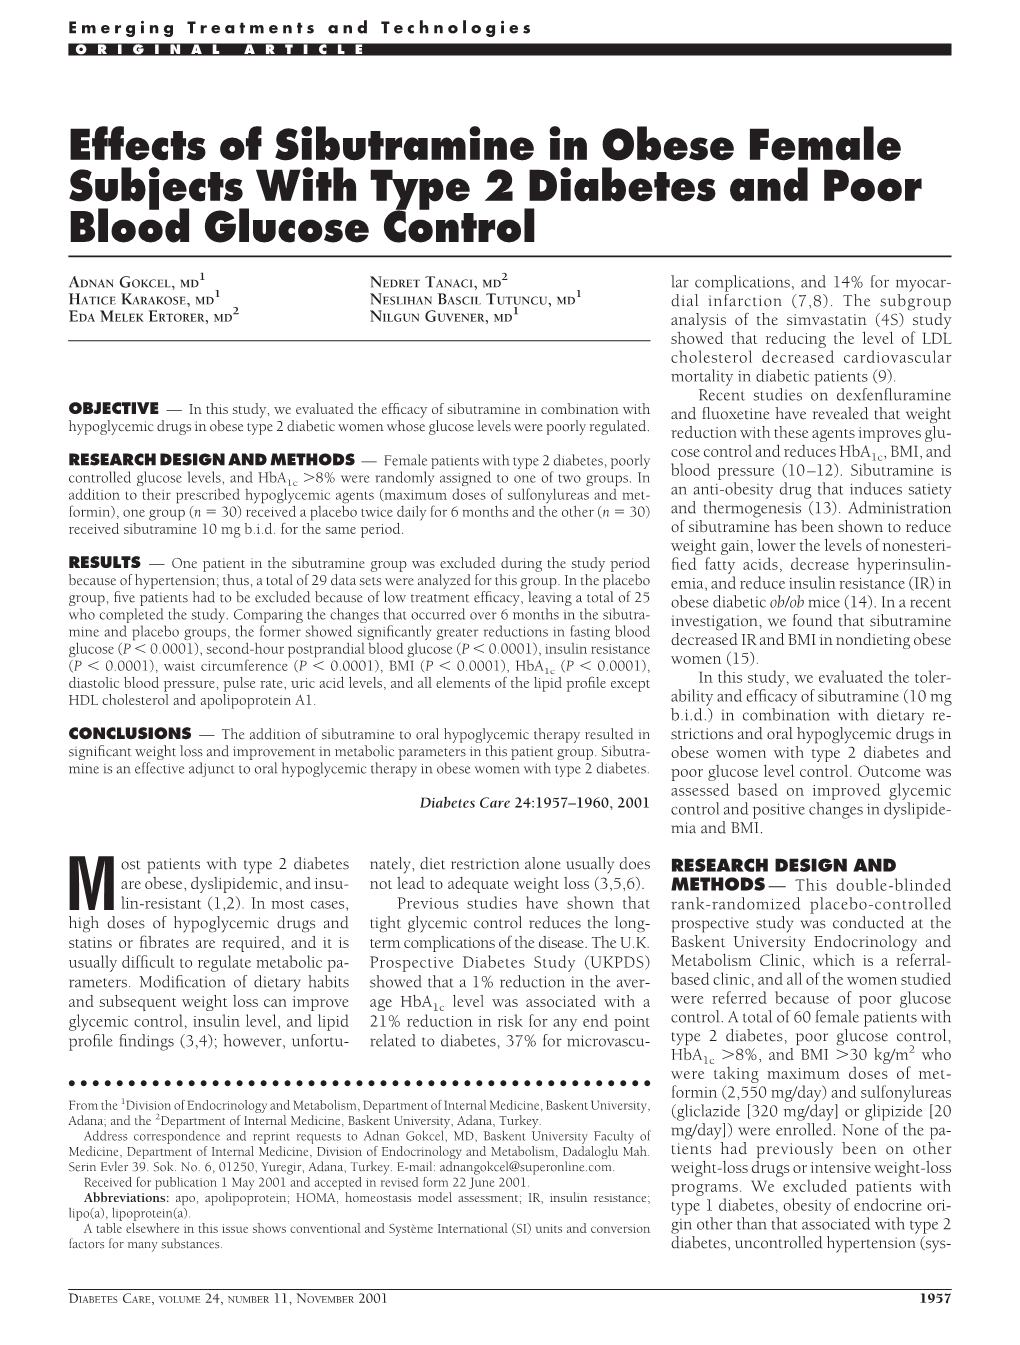 Effects of Sibutramine in Obese Female Subjects with Type 2 Diabetes and Poor Blood Glucose Control